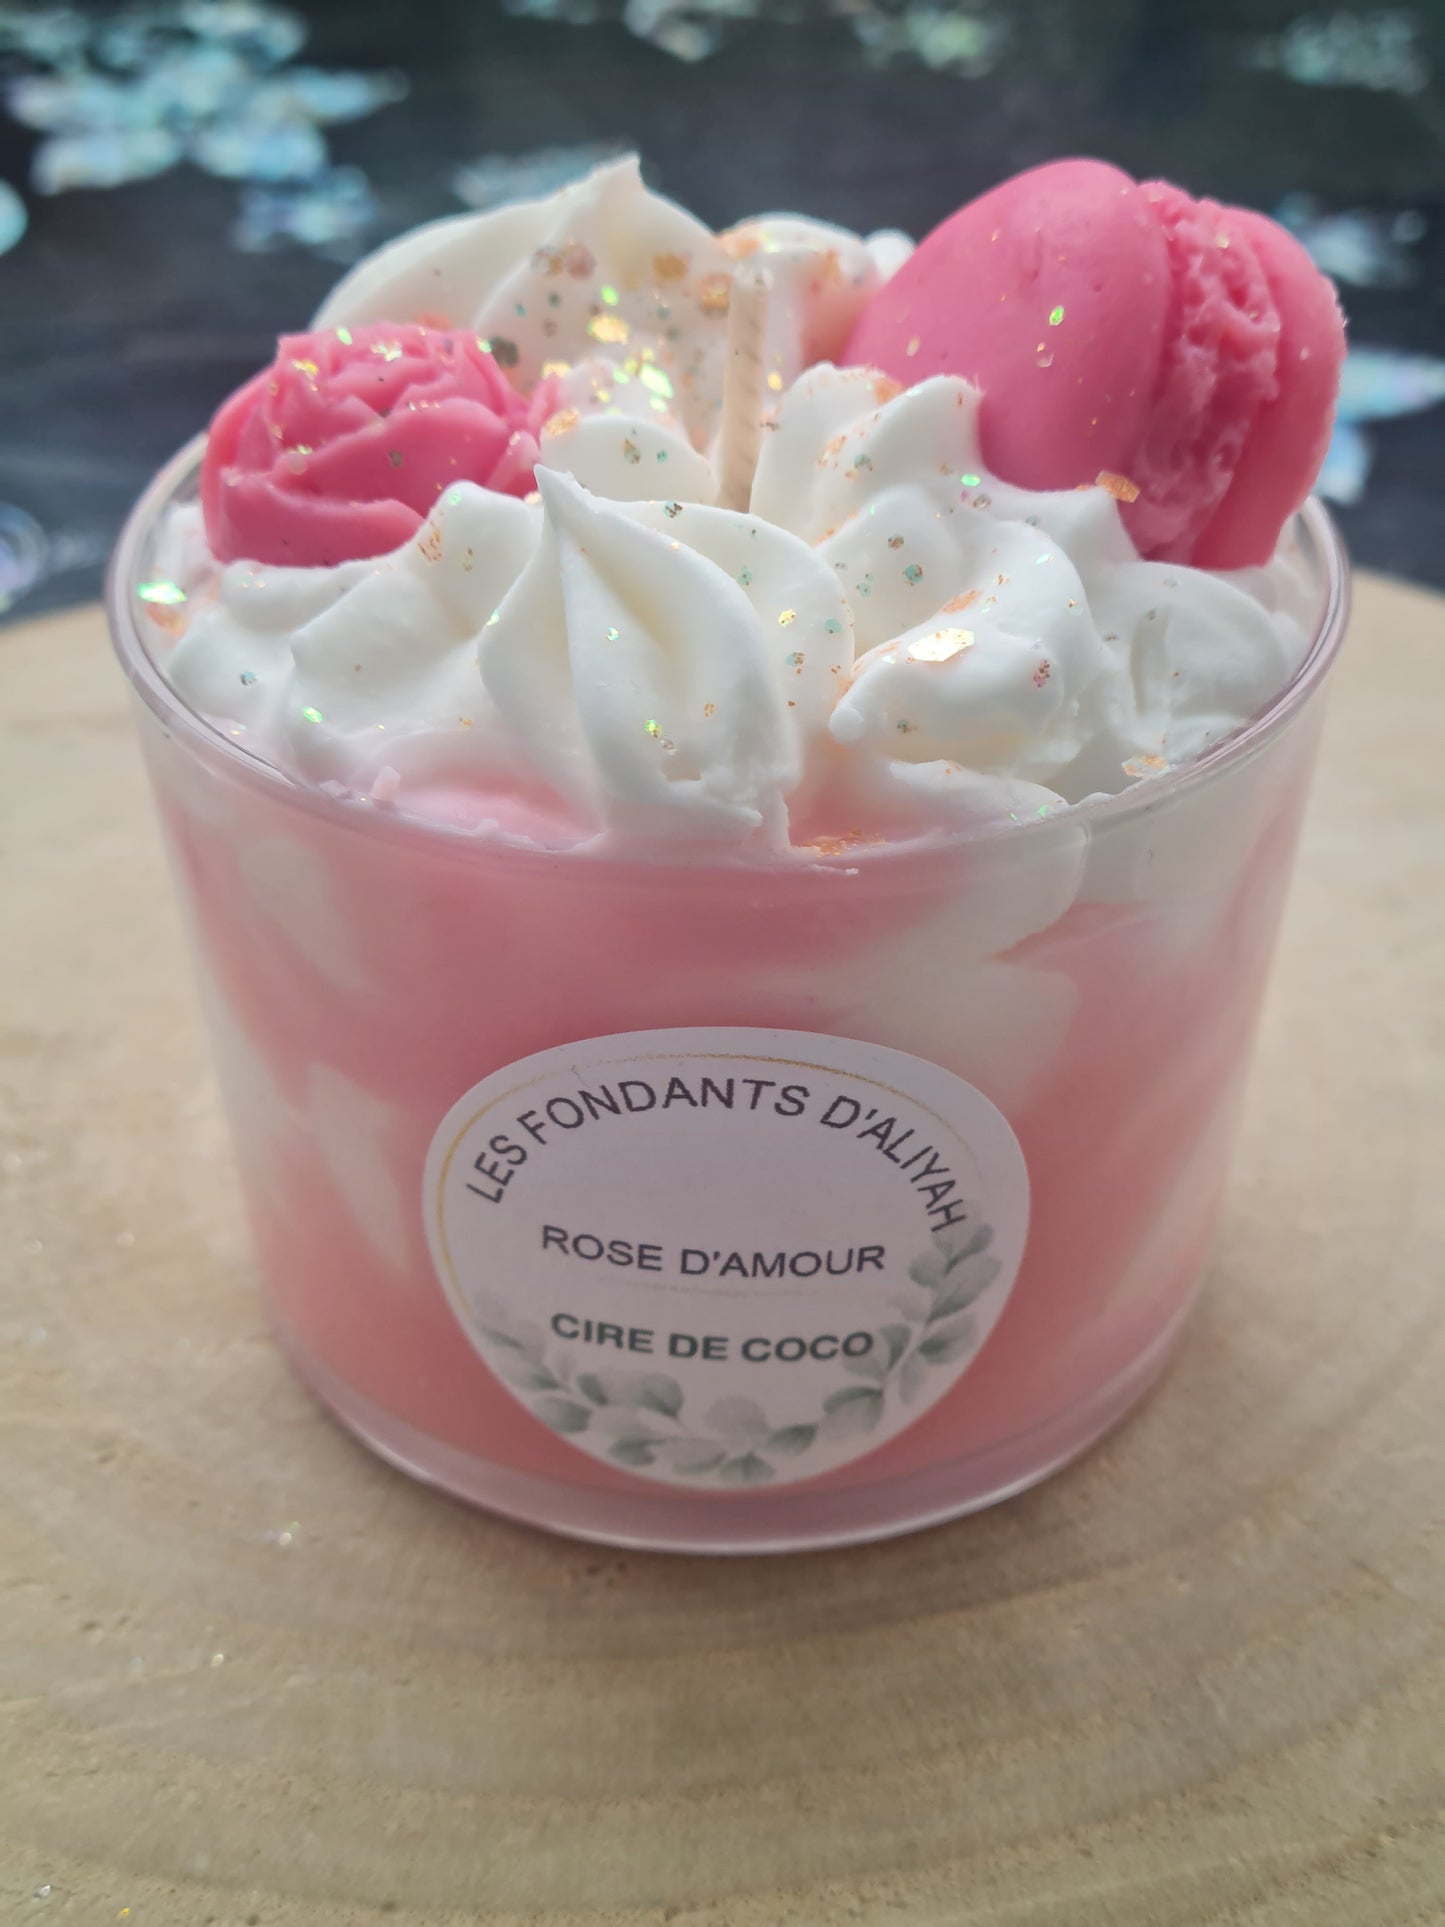 Gourmet candle scented with vegetable wax